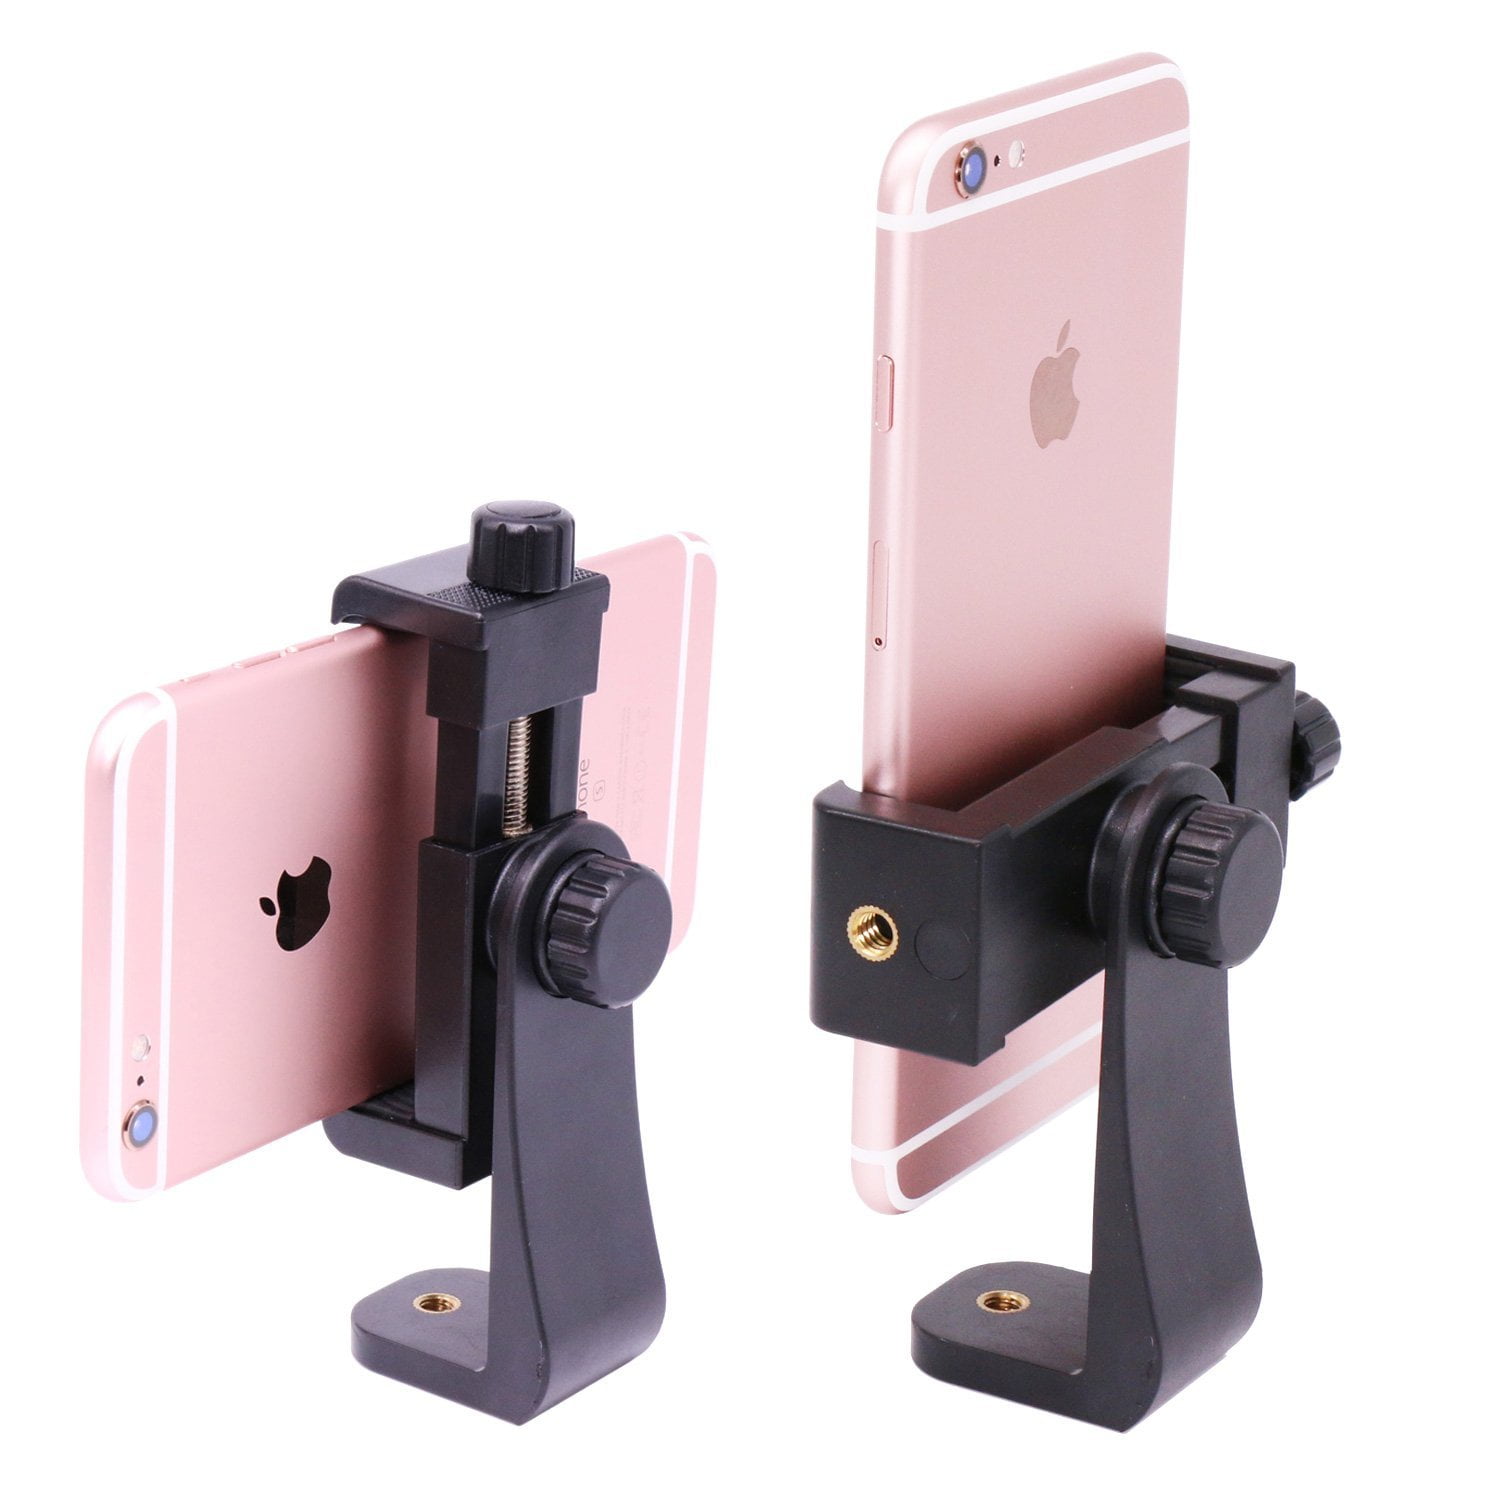 SYGY Phone Tripod Mount Adapter Compatible with iPhone Cellphone Attachment Clip Clamp Universal Metal 360 Rotation Smartphone Holder Selfie Stick Camera Android Heavy Duty Cell Phone Bracket